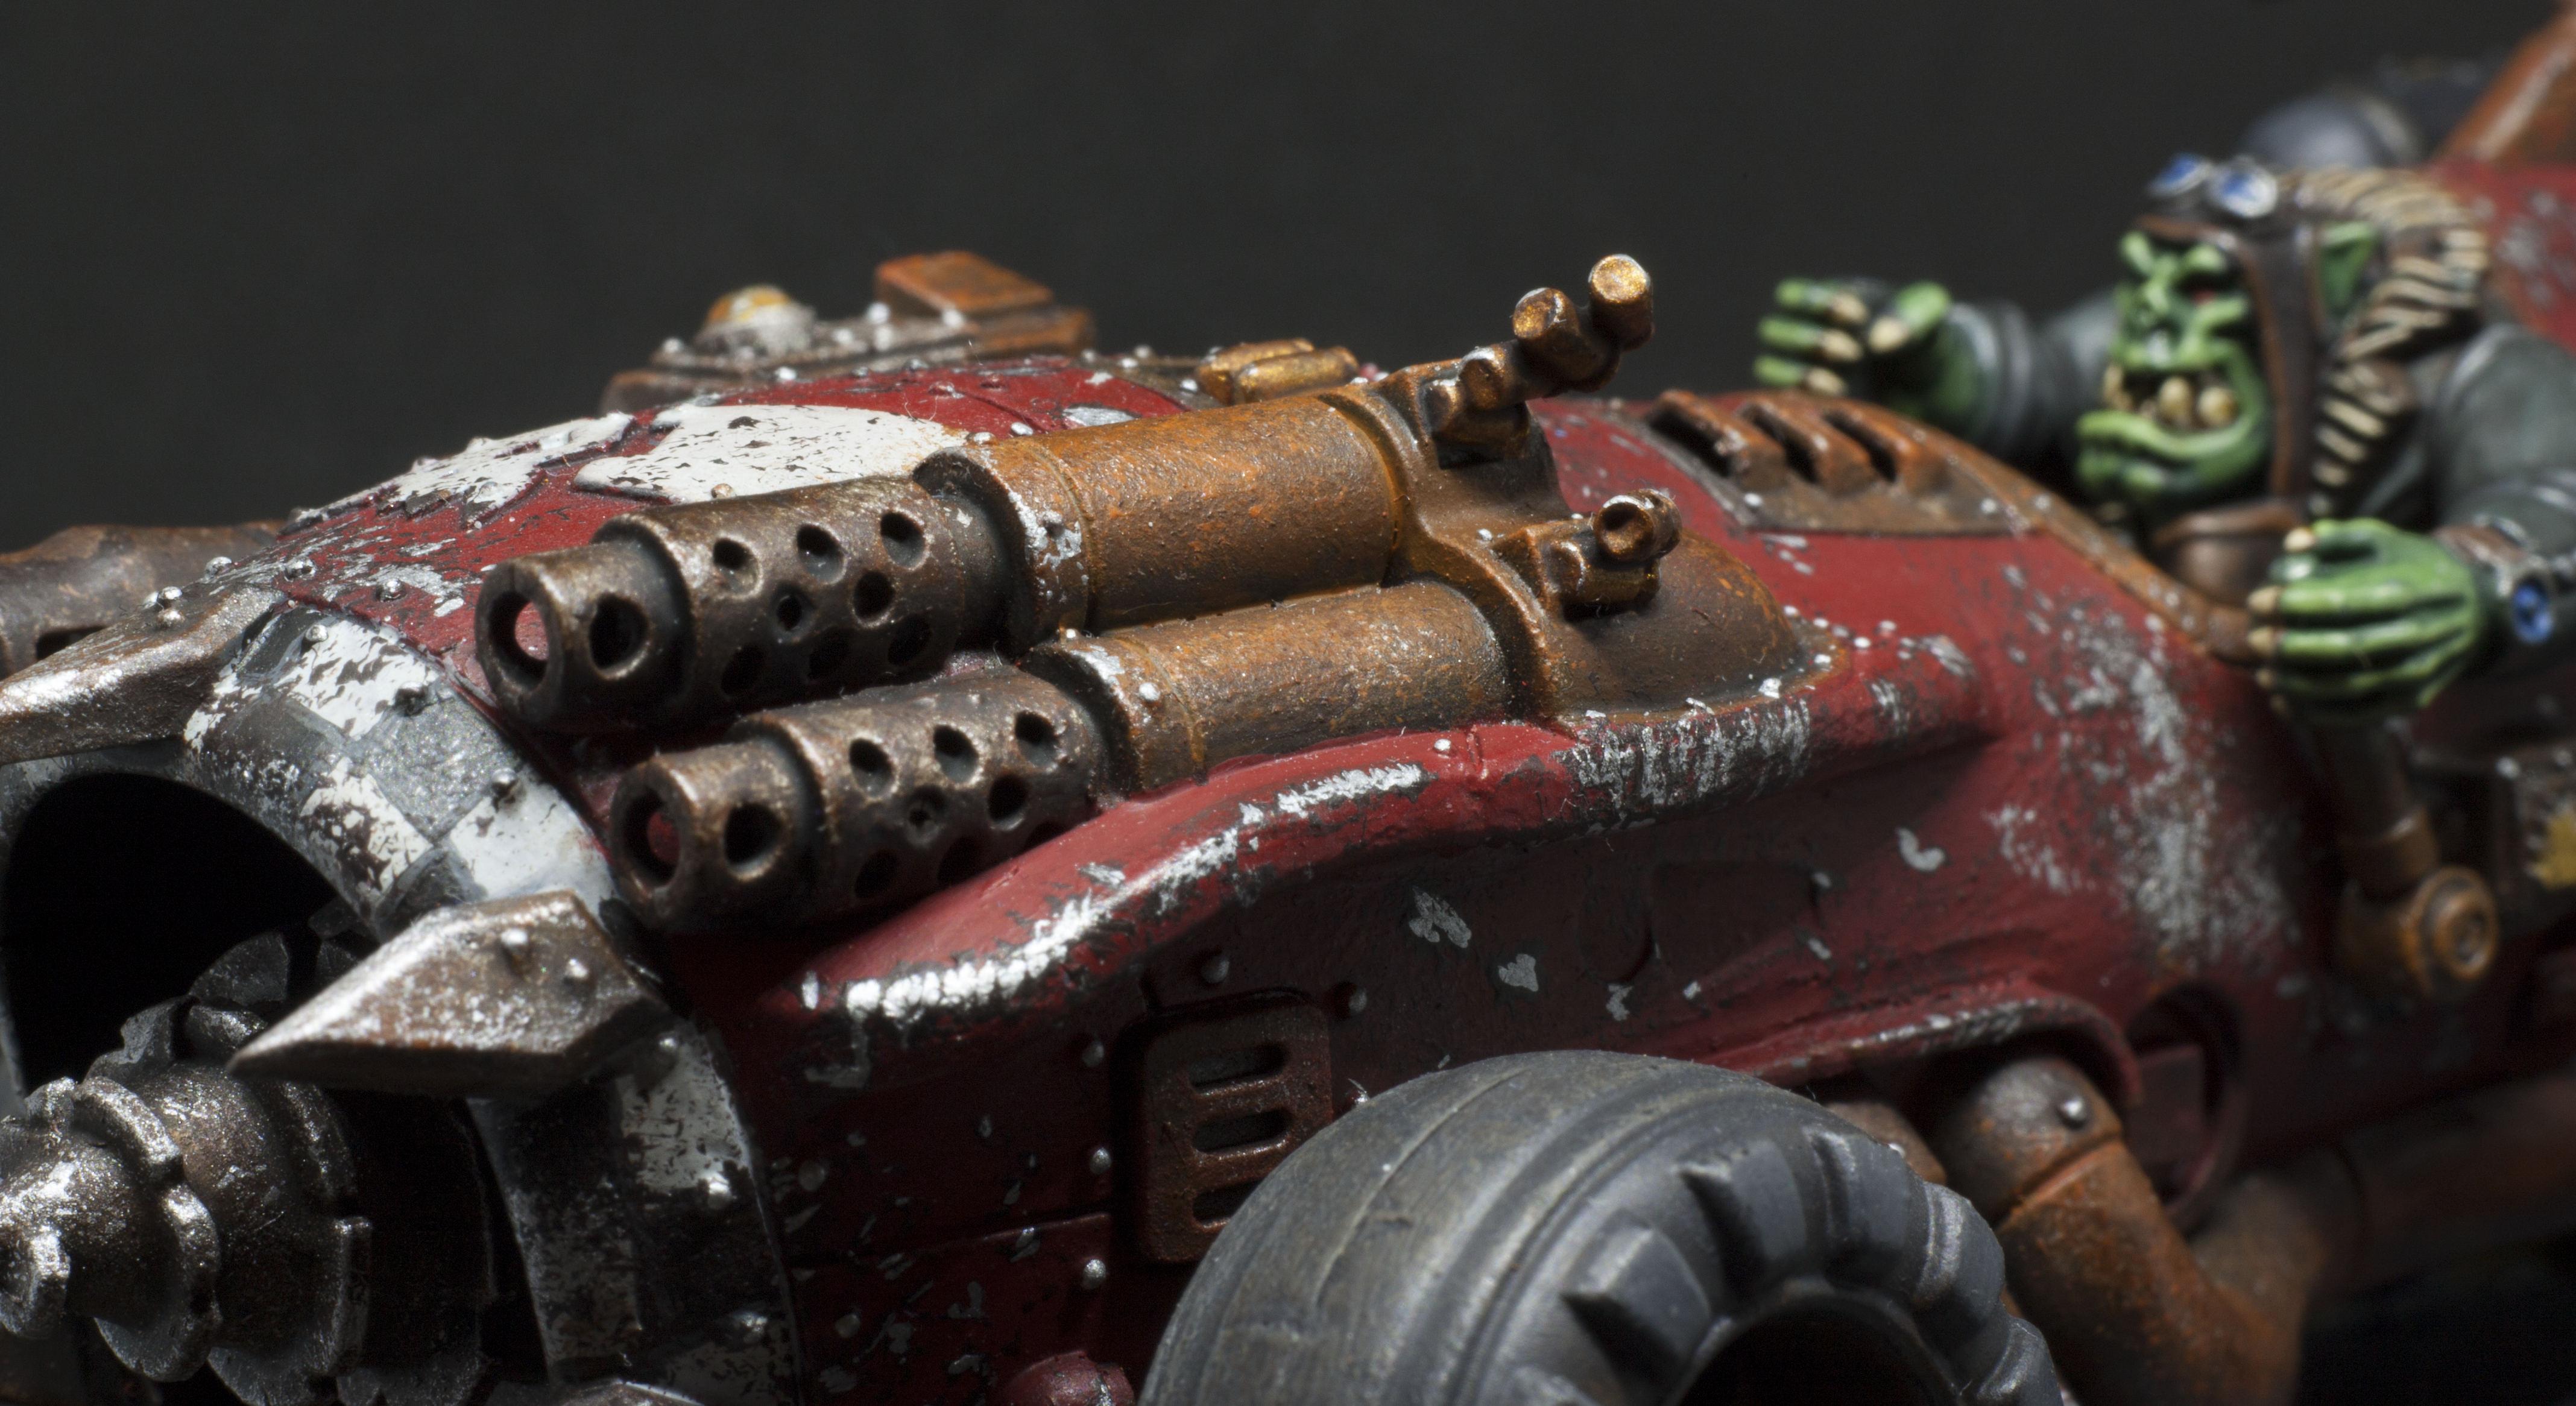 Asphalt, Battle Damage, Cars, Checkers, Chipping, Evil Sunz, Fast Attack, Orks, Red, Road, Rust, Speed, Vehicle, Waaagh, Warhammer 40,000, Weathered